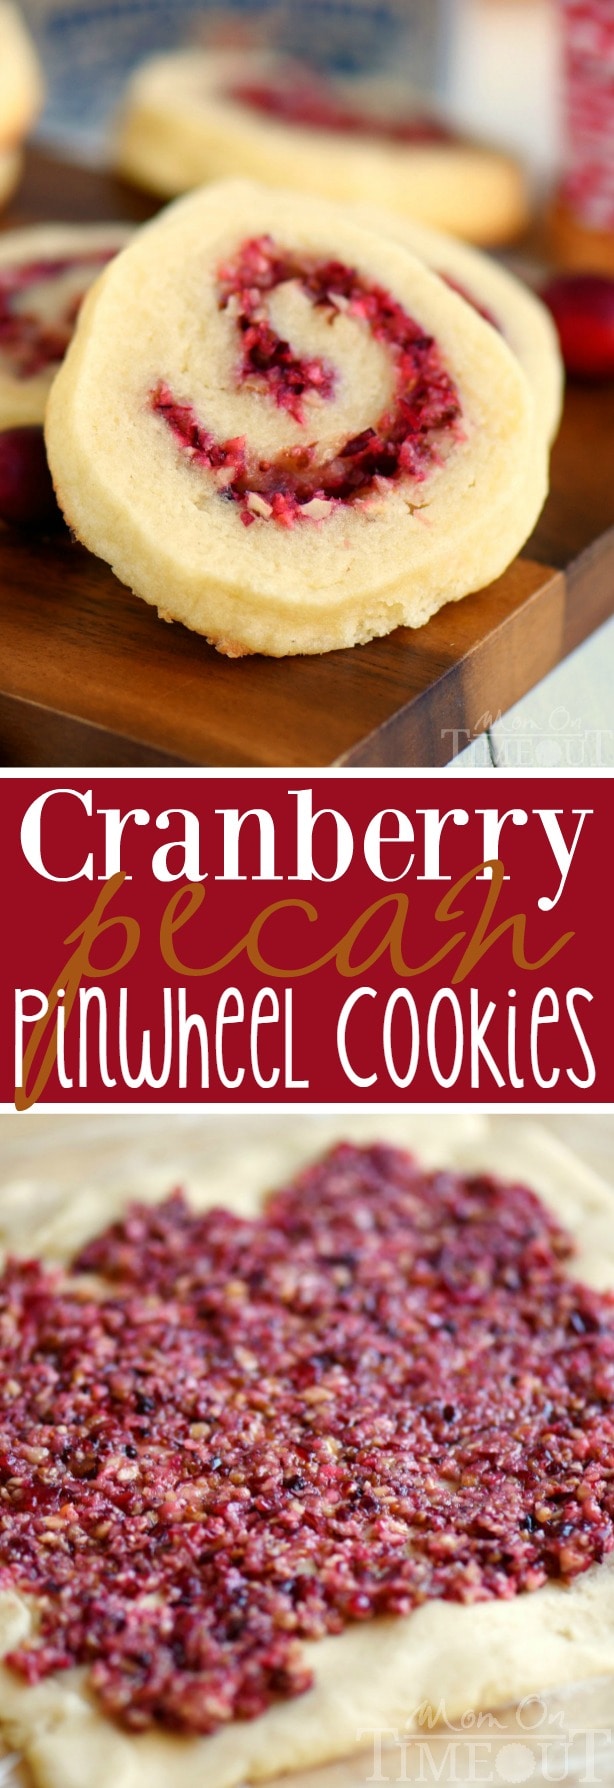 These delightful Cranberry Pecan Pinwheel Cookies are bound to become a new favorite for your family! So easy to make and packed with the refreshing flavors of cranberries, orange, and pecans!